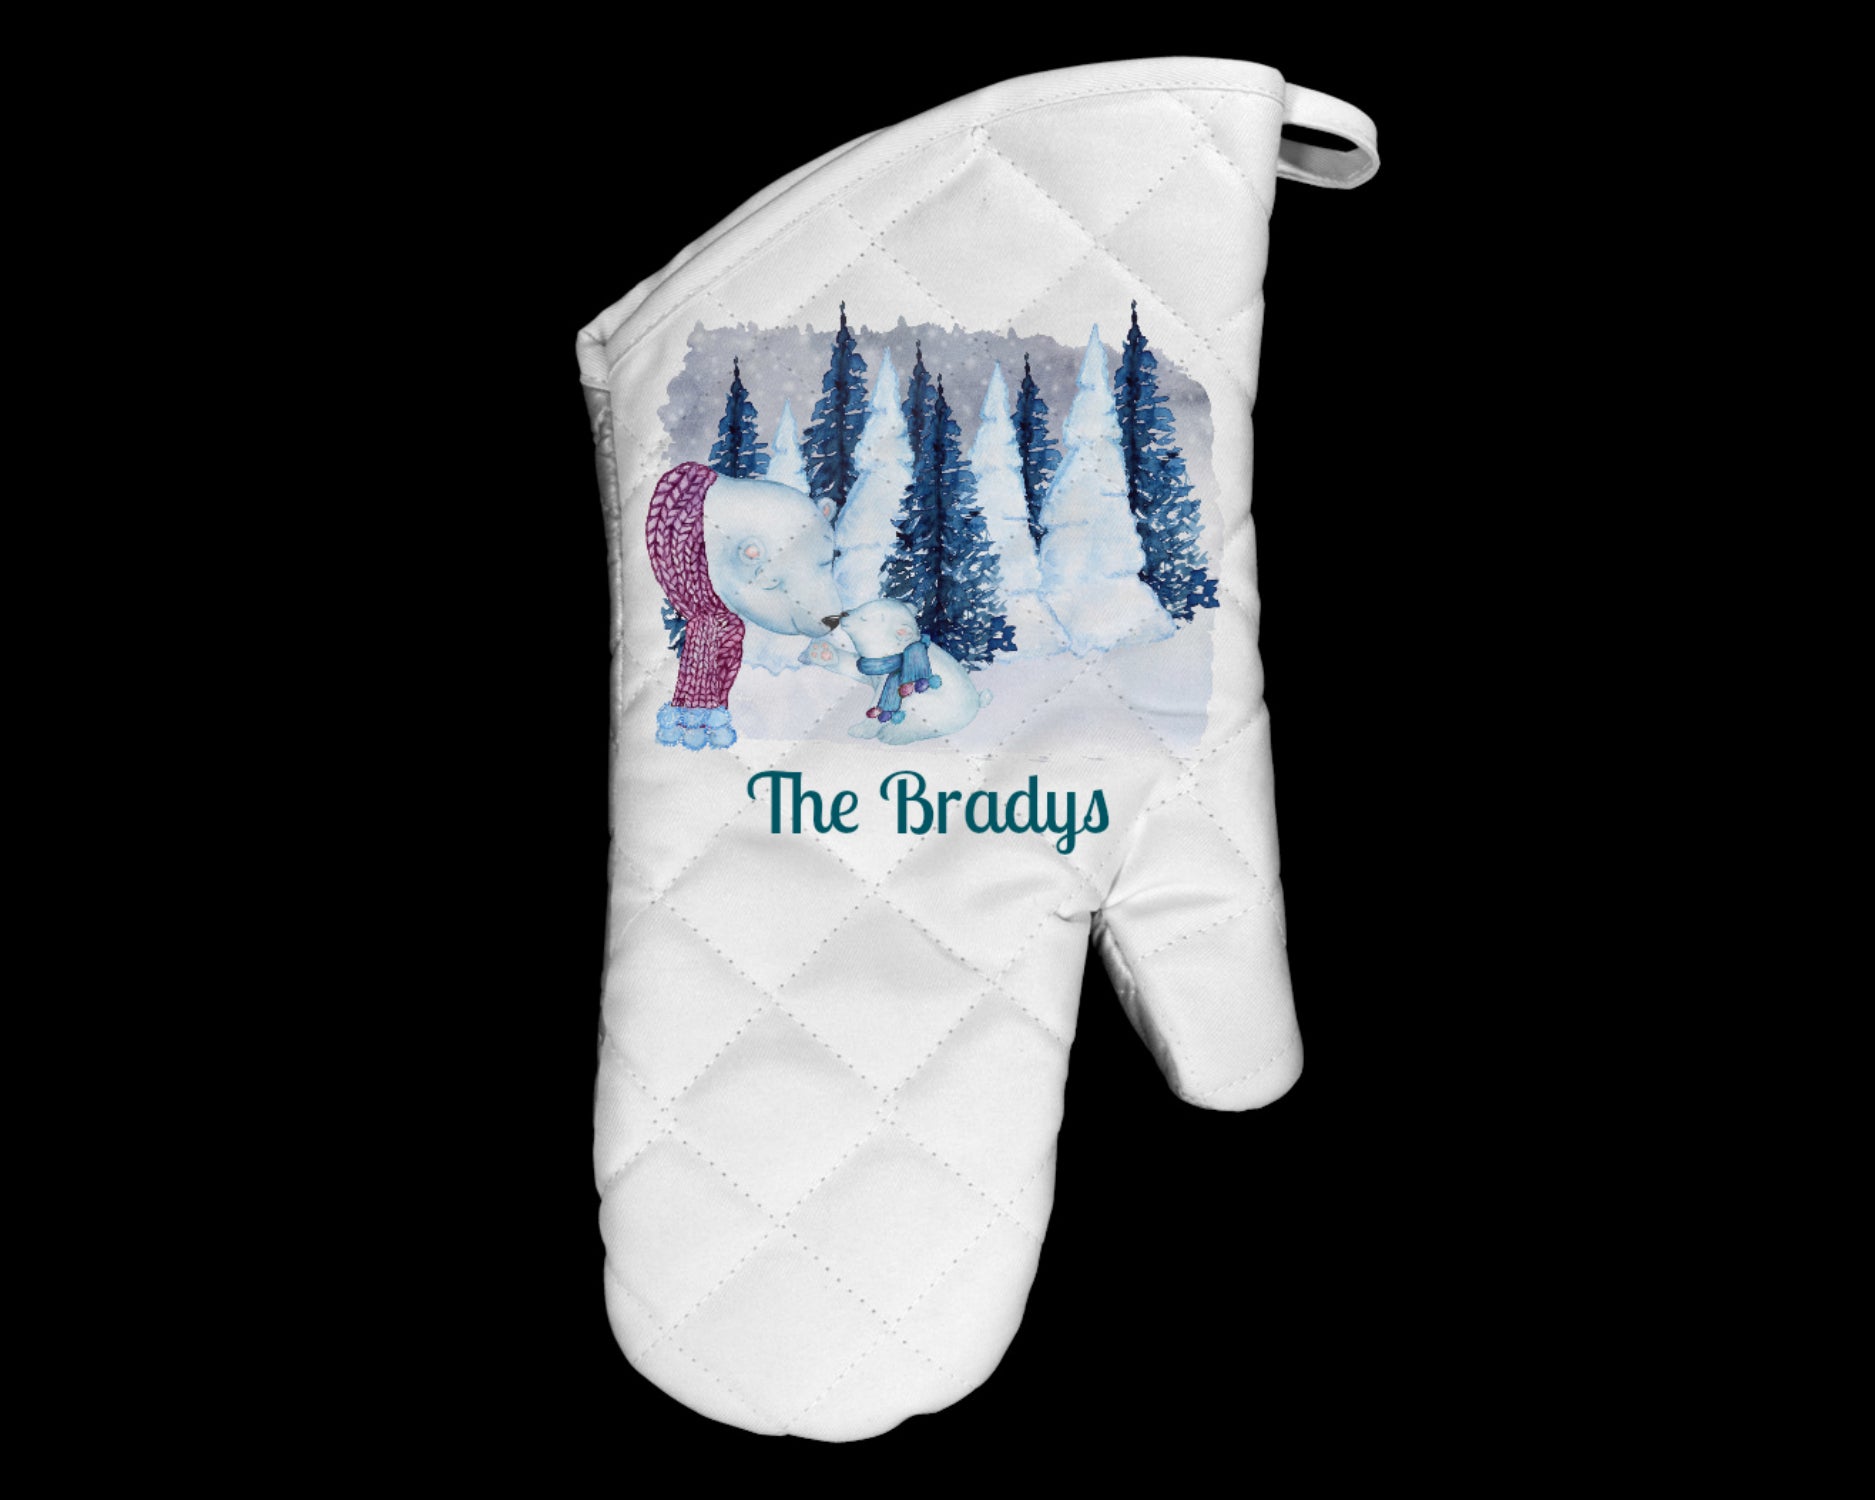 Custom Kitchen towel with oven mitts and glove